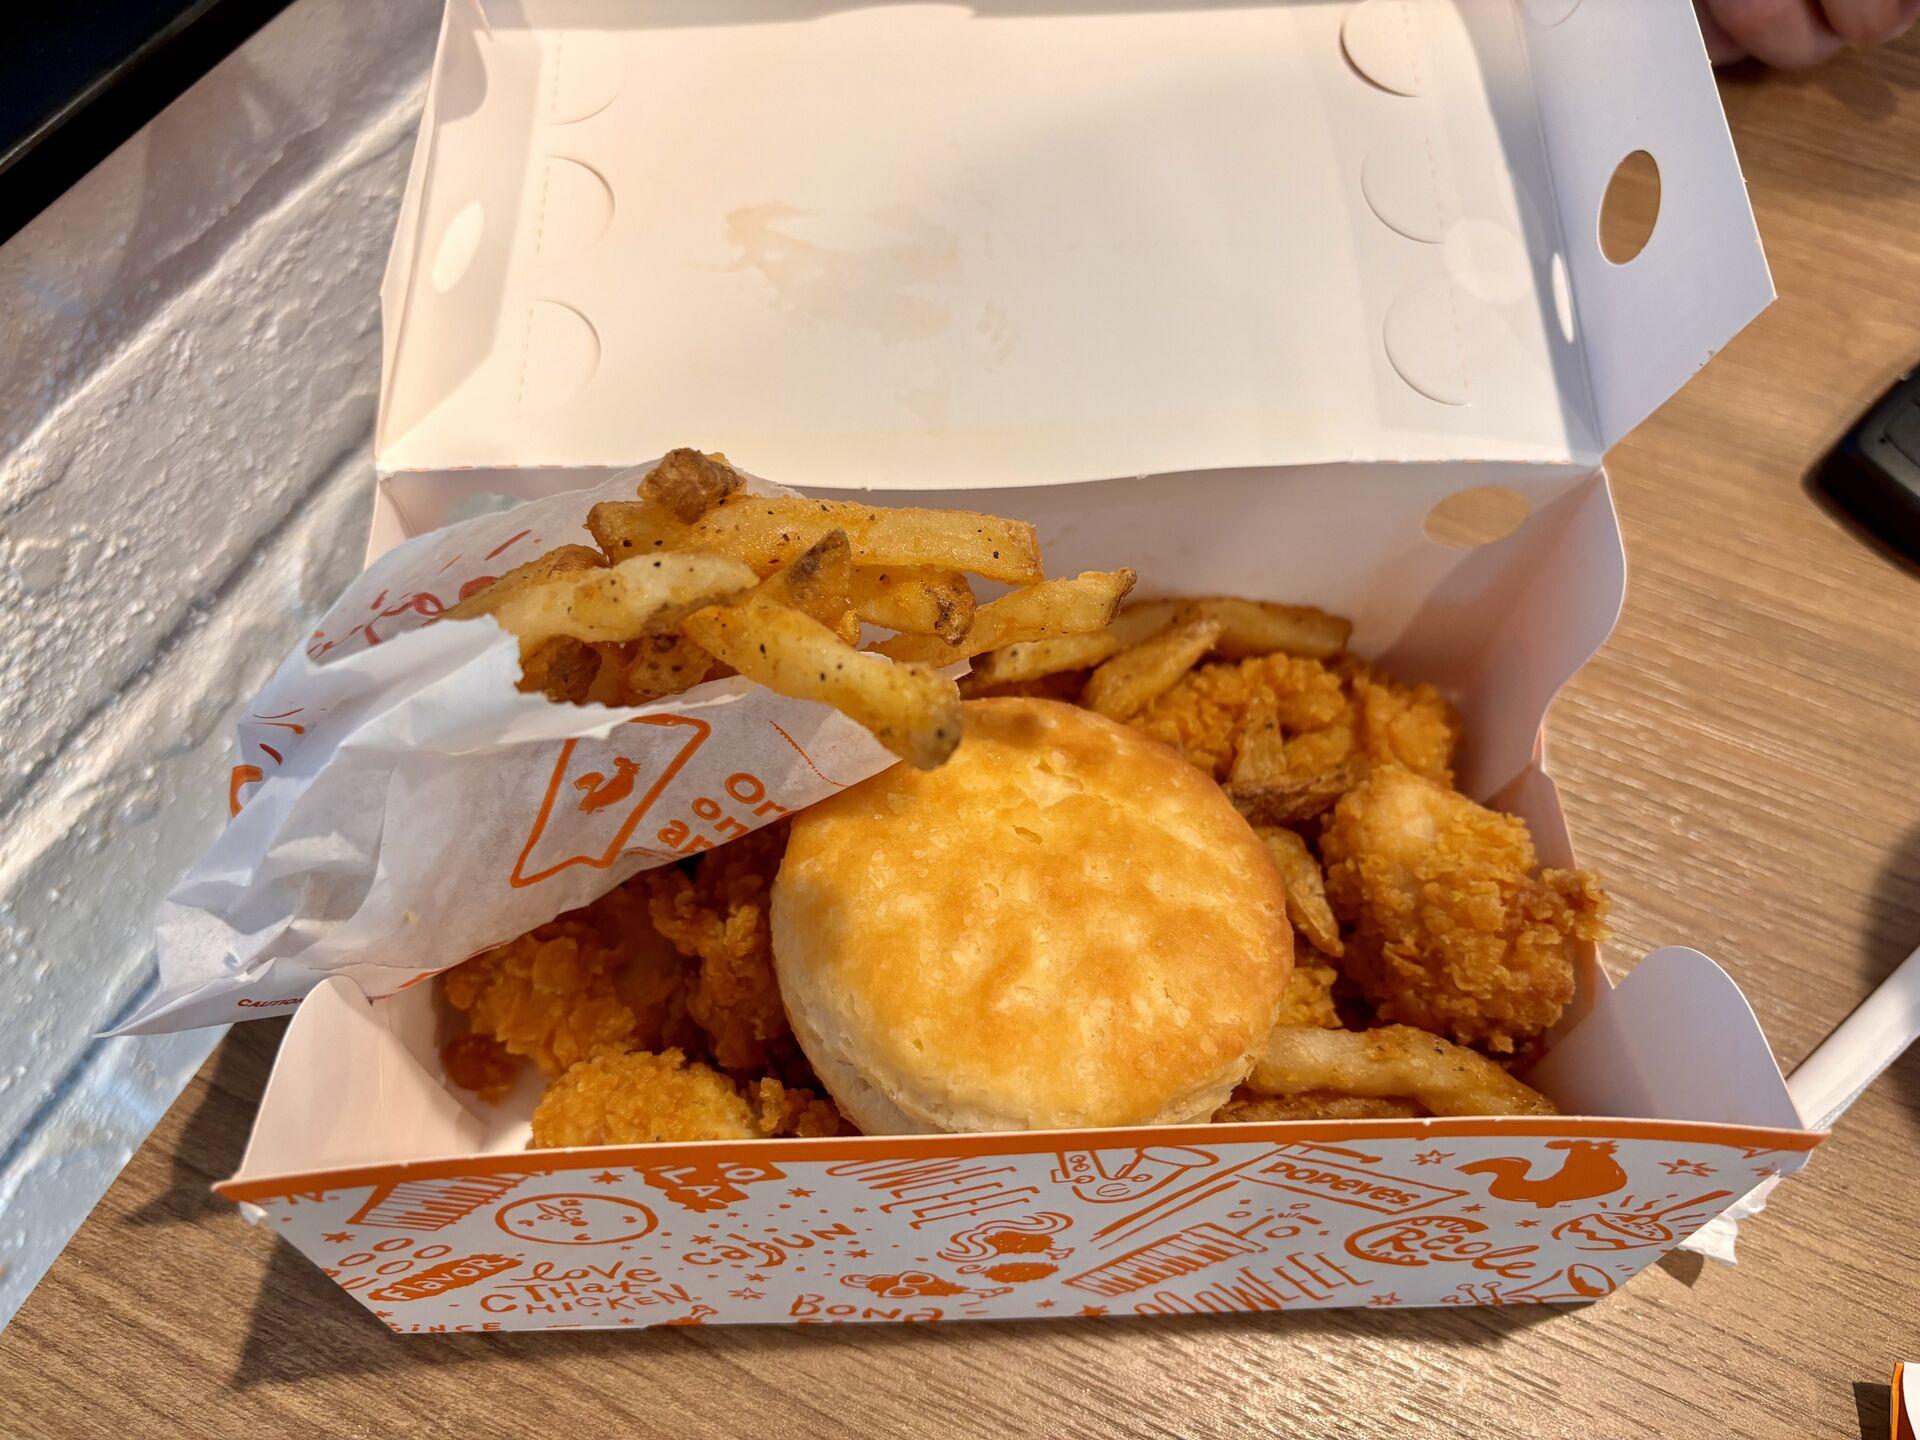 A paper box of buttermilk chicken nuggets, topped with a biscuit and a small paper bag of fries